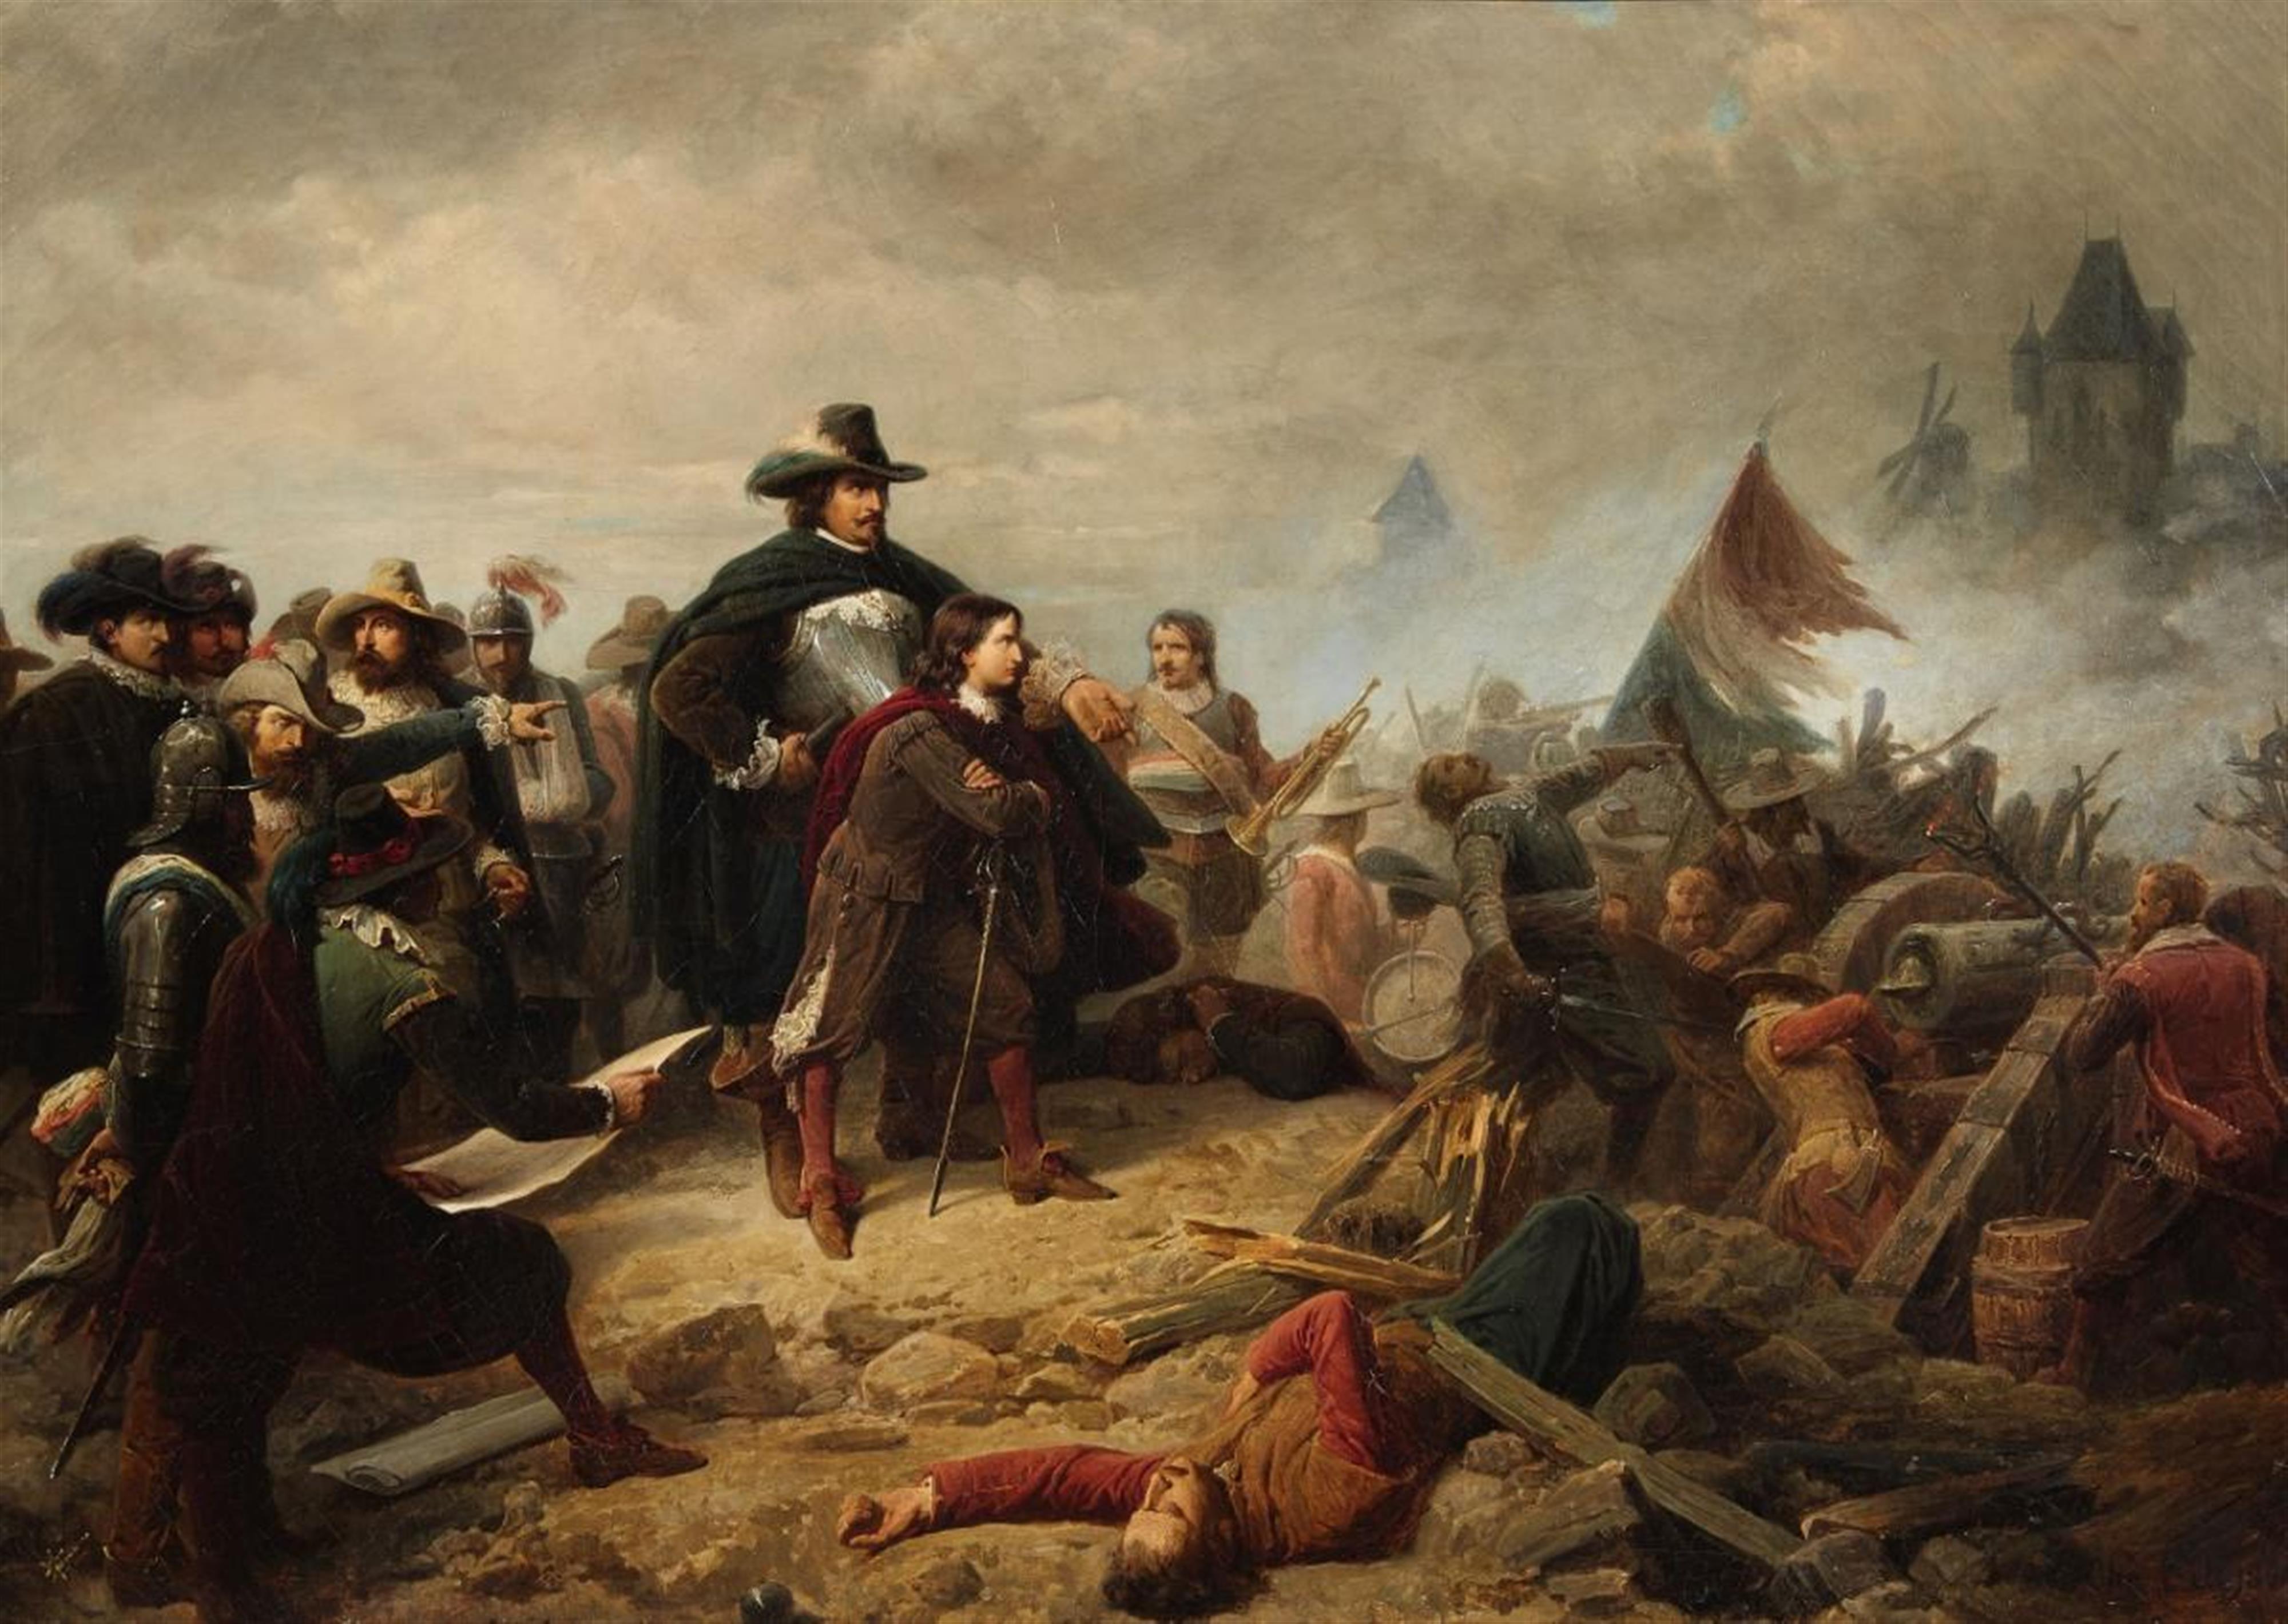 Christian Sell - A General on the Battlefield during the 30 Years' War - image-1